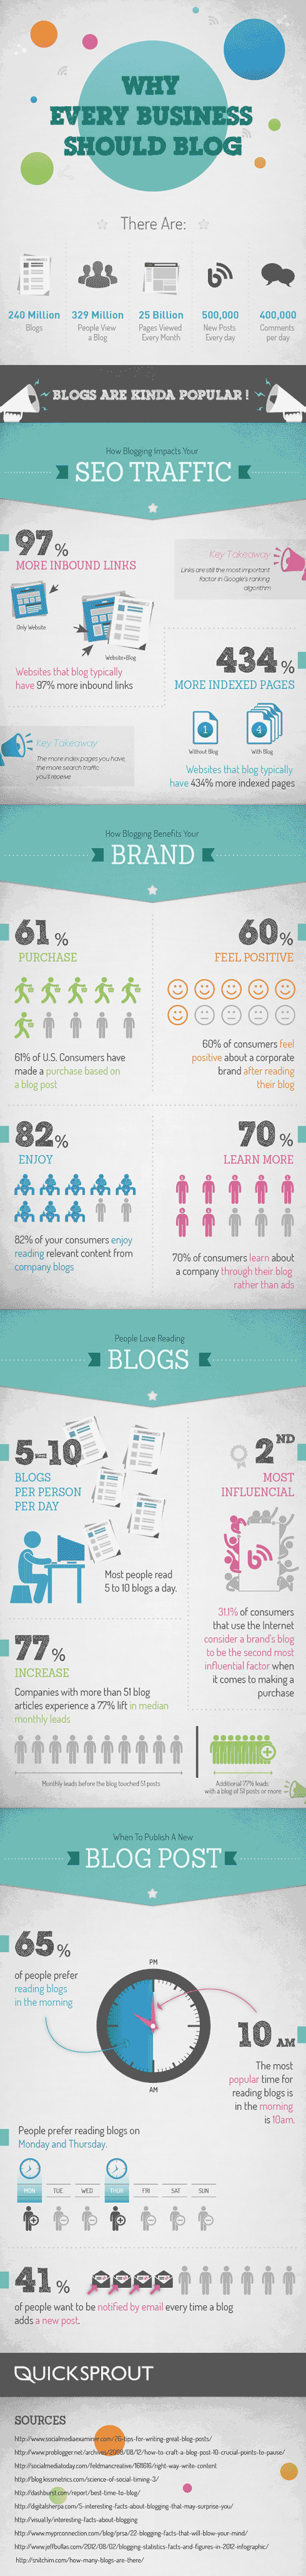 Why Every Business Should Blog